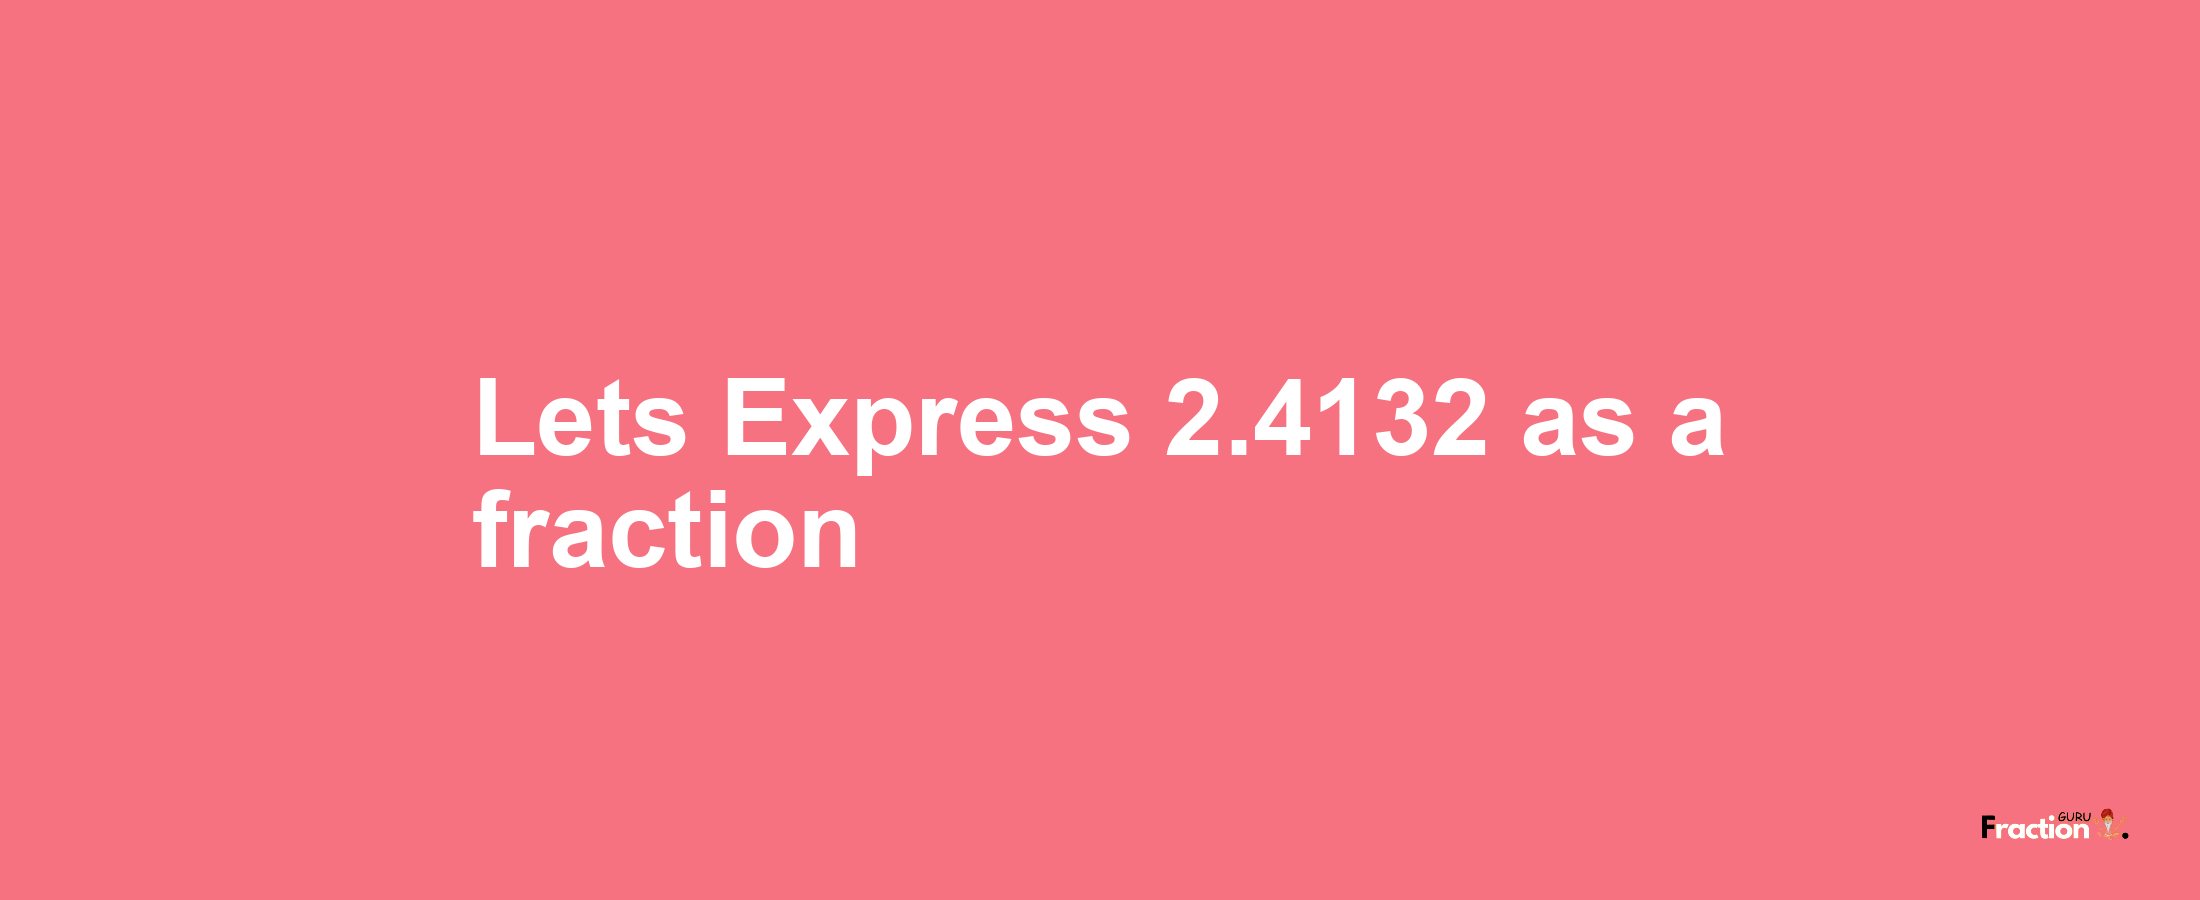 Lets Express 2.4132 as afraction